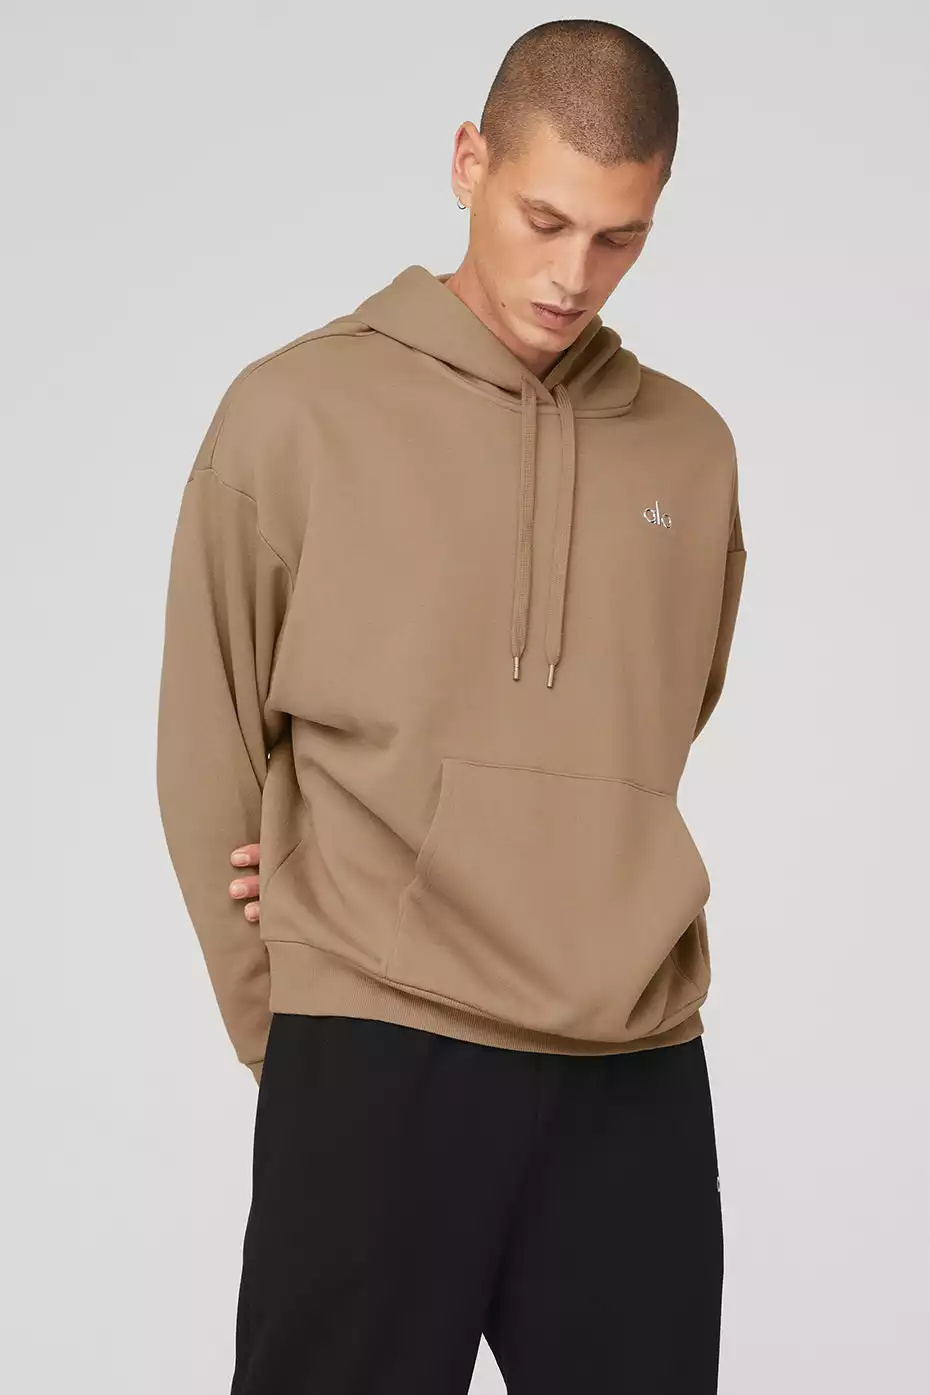 Get Reasonable Price Alo Yoga Accolade Hoodie For Men Dark Olive at great  prices at